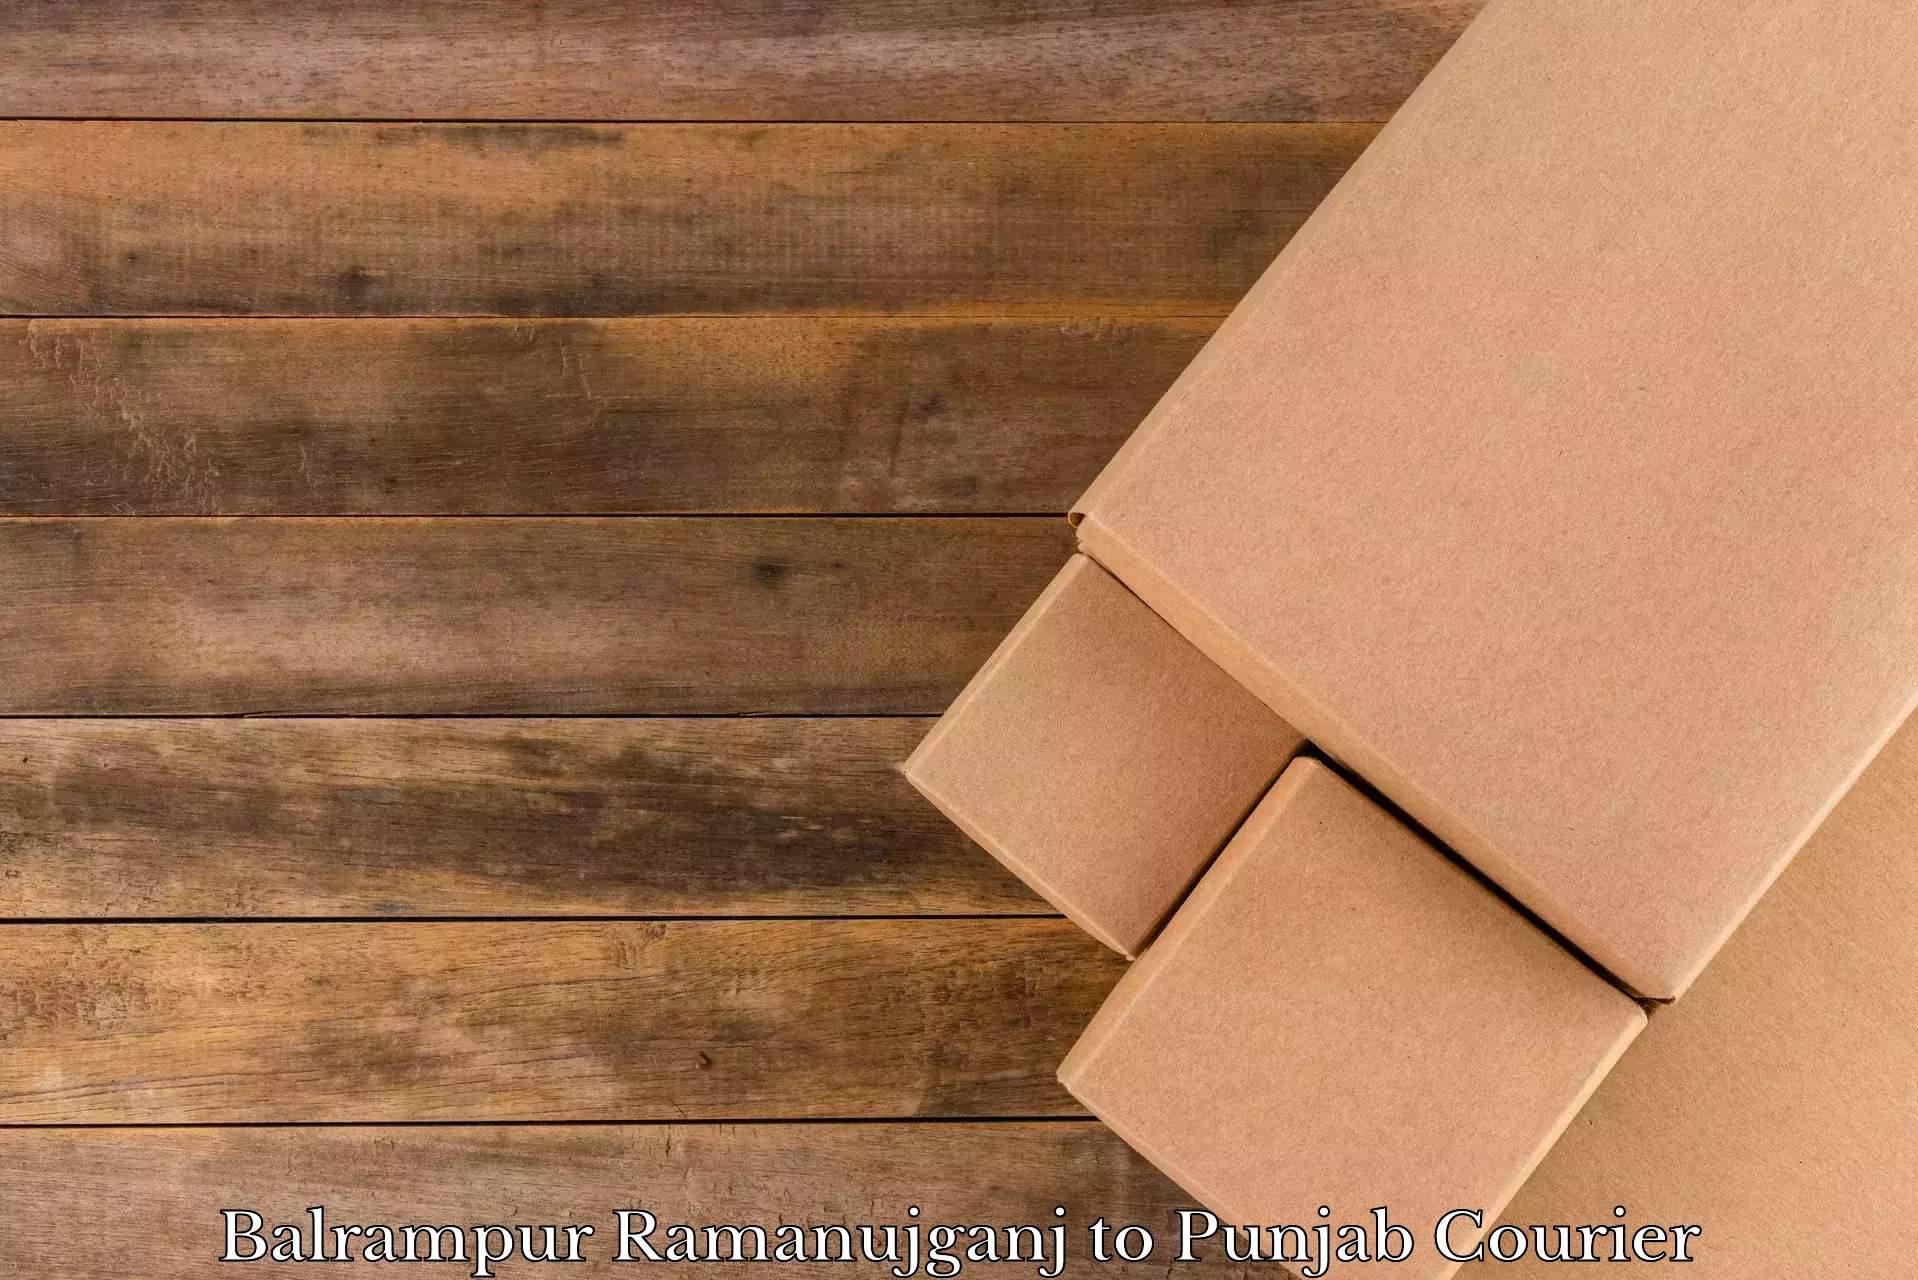 Quality relocation services Balrampur Ramanujganj to IIT Ropar